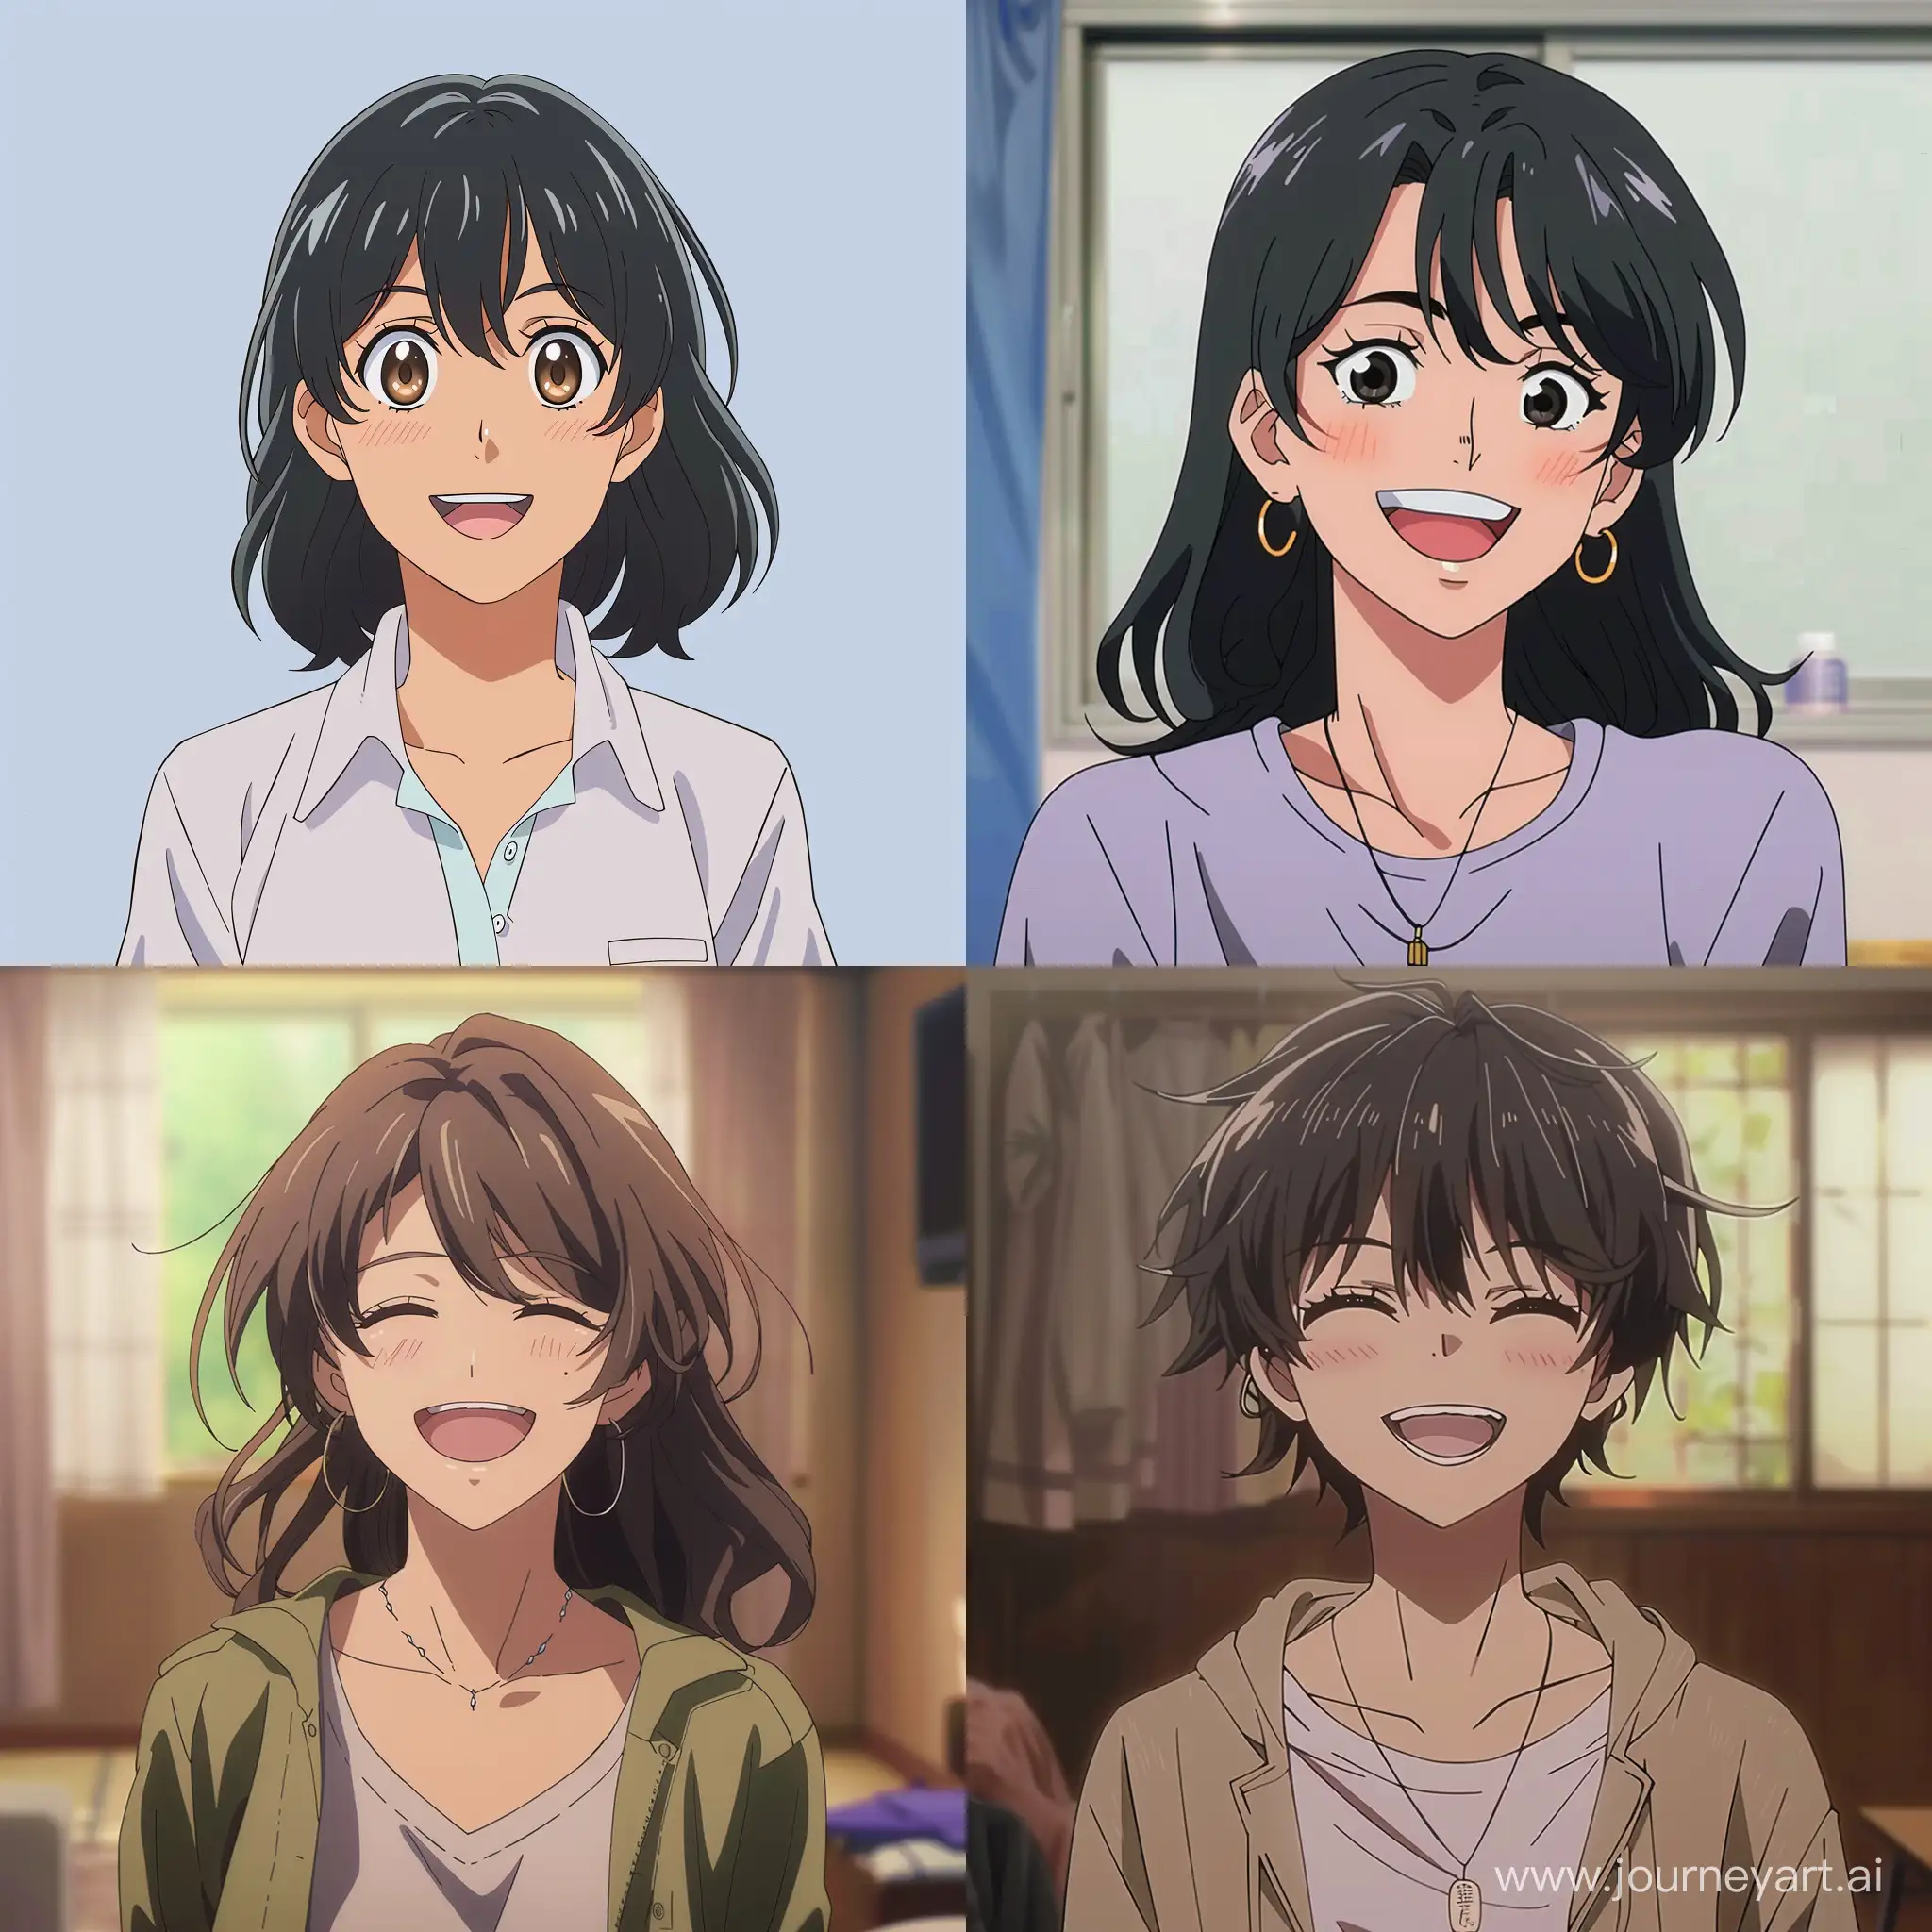 Cheerful-Anime-Character-Smiling-Happily